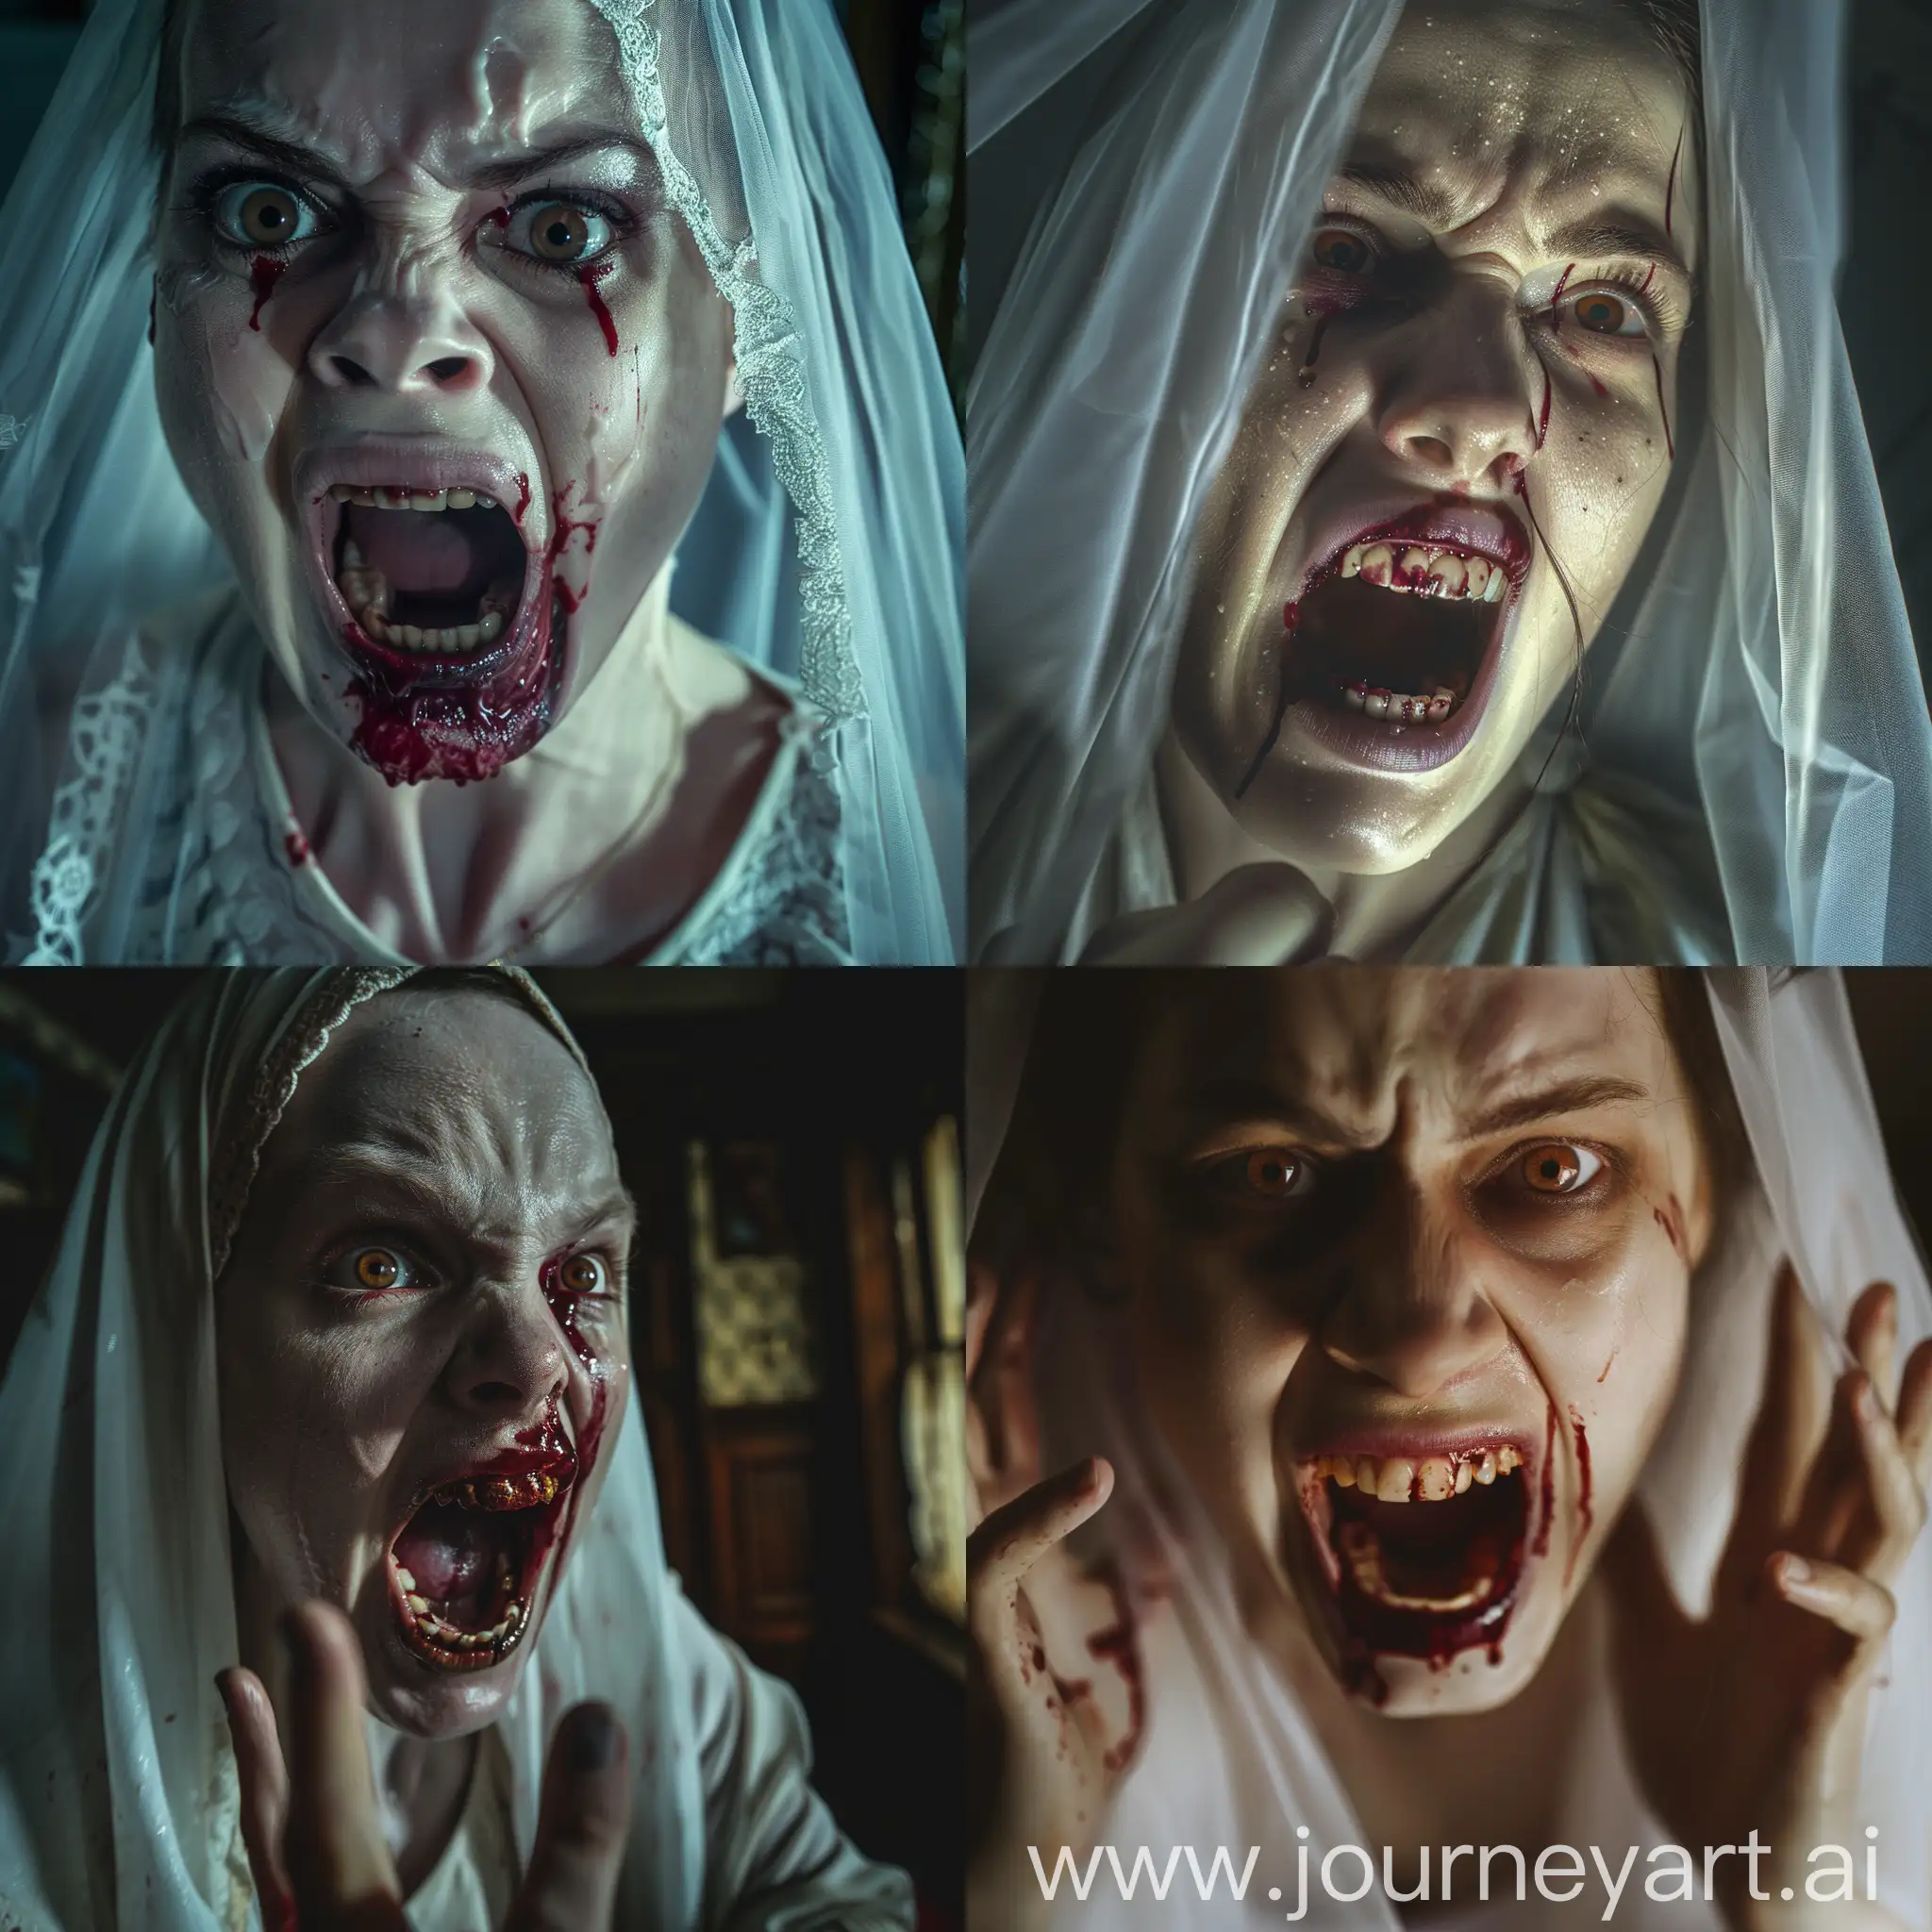 Pale skin woman with brown eyelenses, crying blood, informal teeth, shouting, white veil, at dark creepy home, cinematic lighting, realistic image, Portrait Photography, Close-Up shot